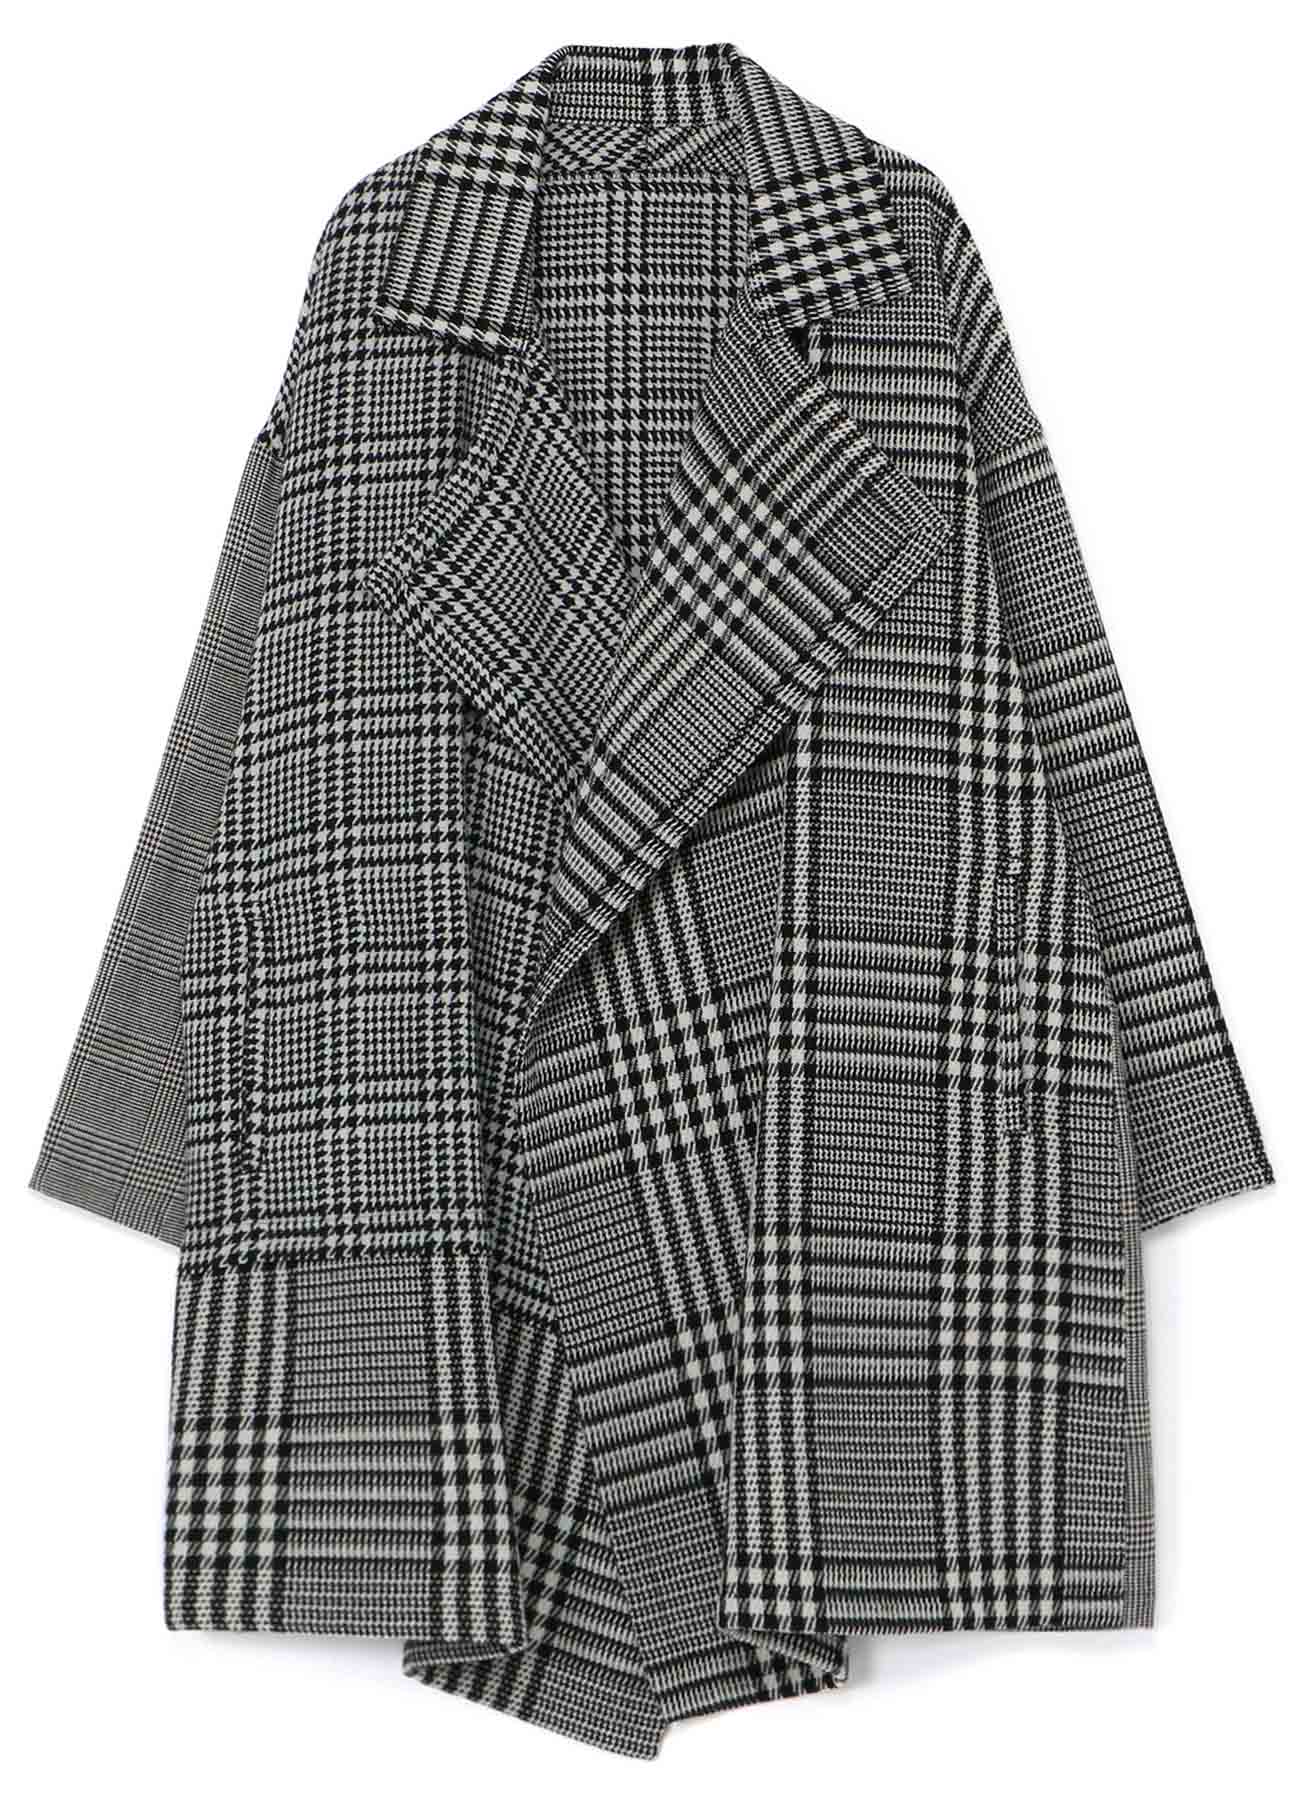 CRAZY CHECK MULTI-MATERIAL SWITCHED DRAPED COAT